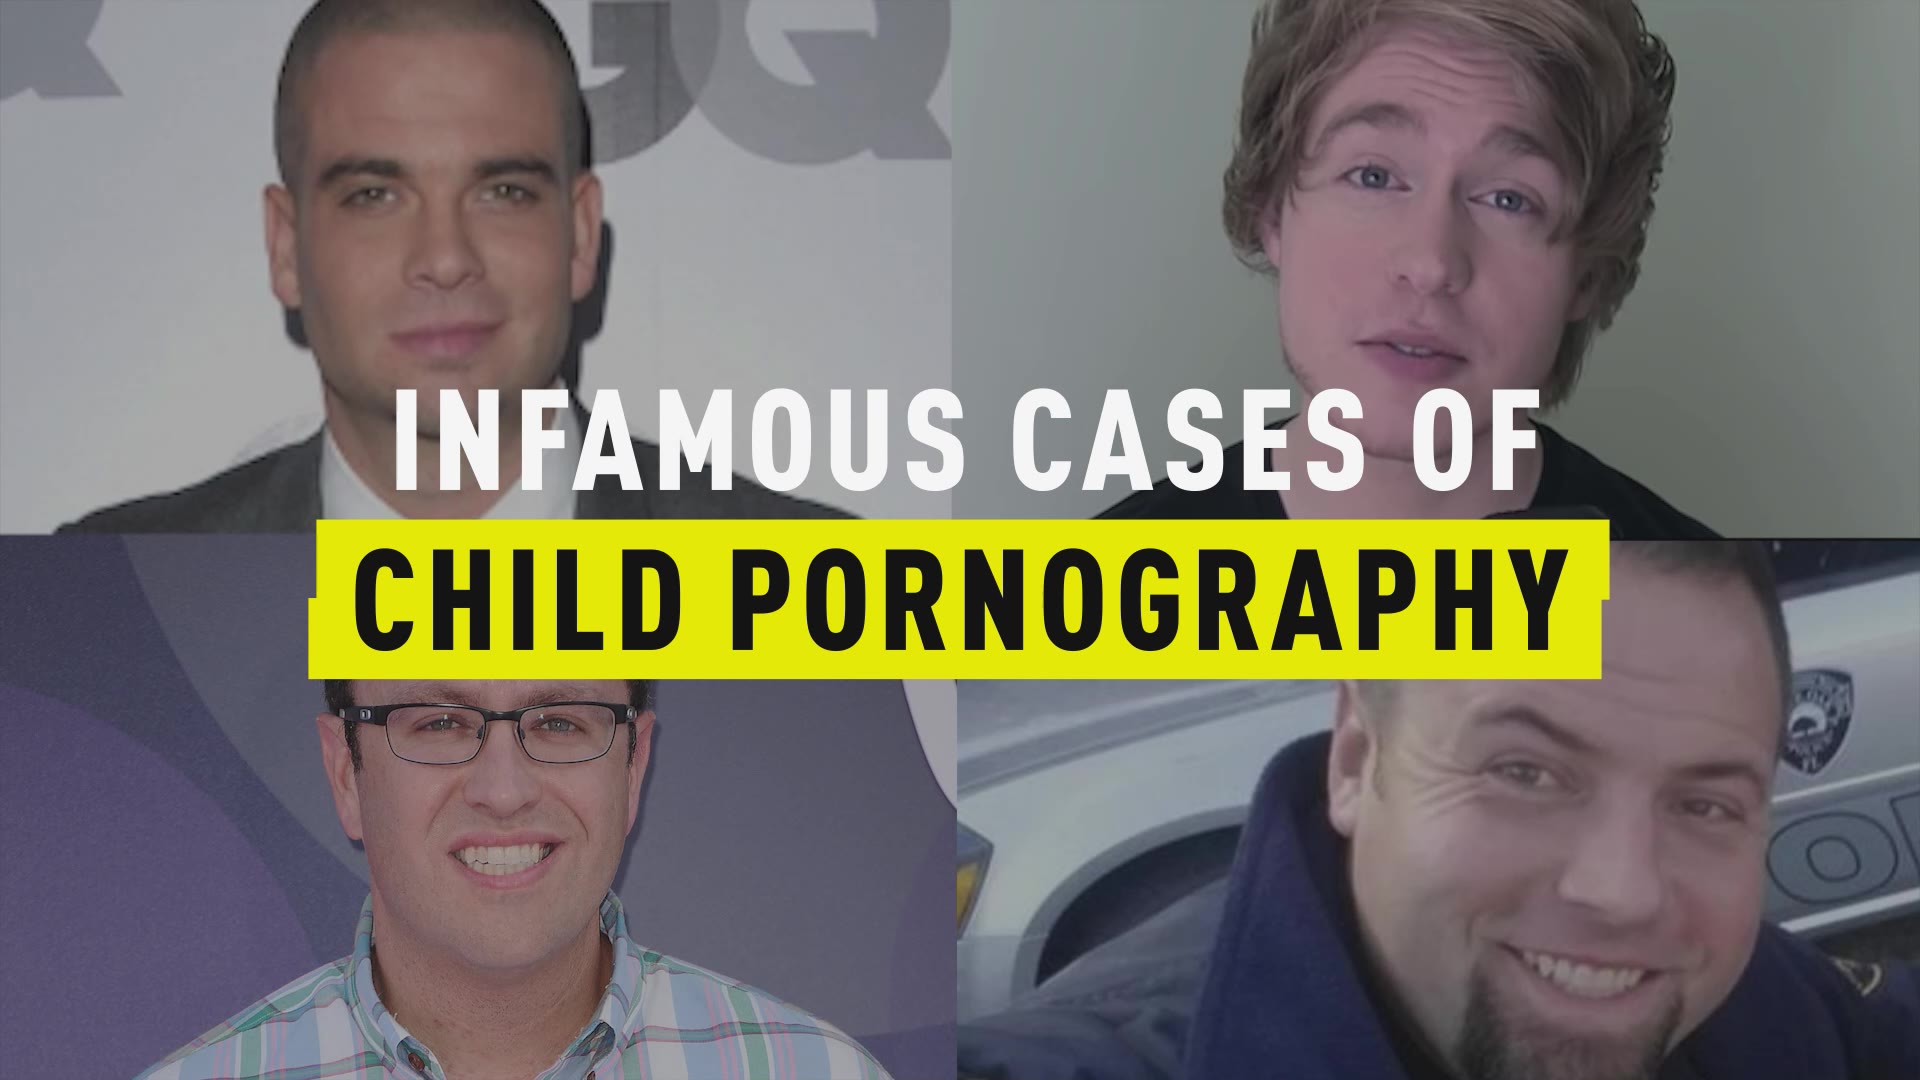 Pornography - Infamous Cases of Child Pornography